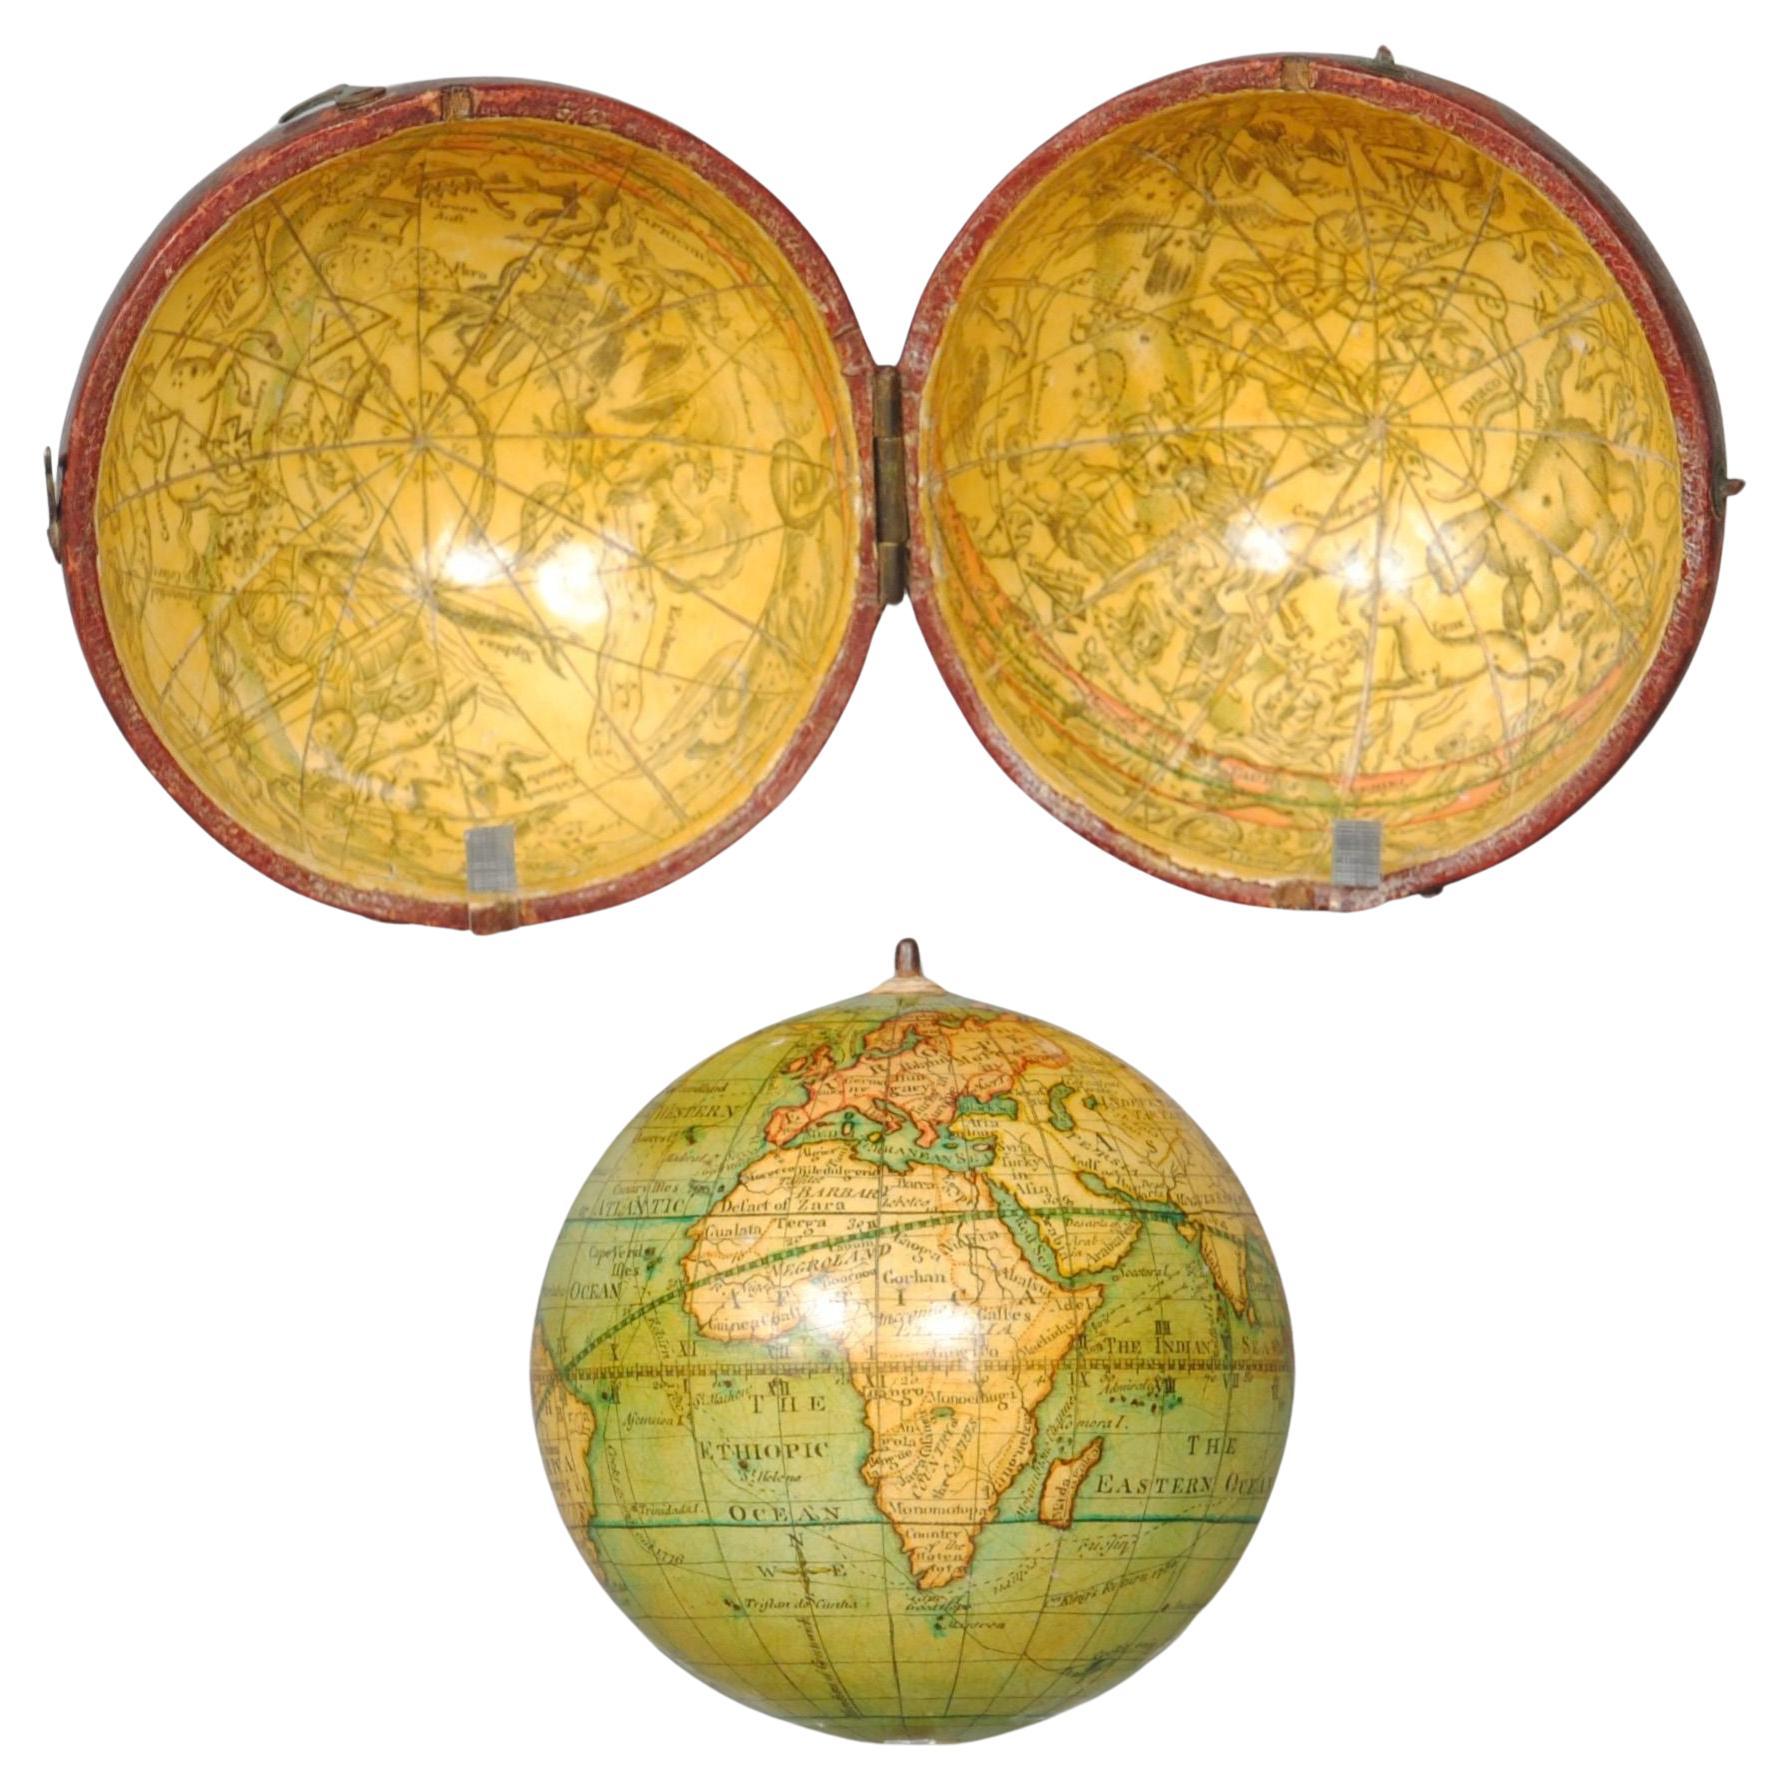 What is a pocket globe?